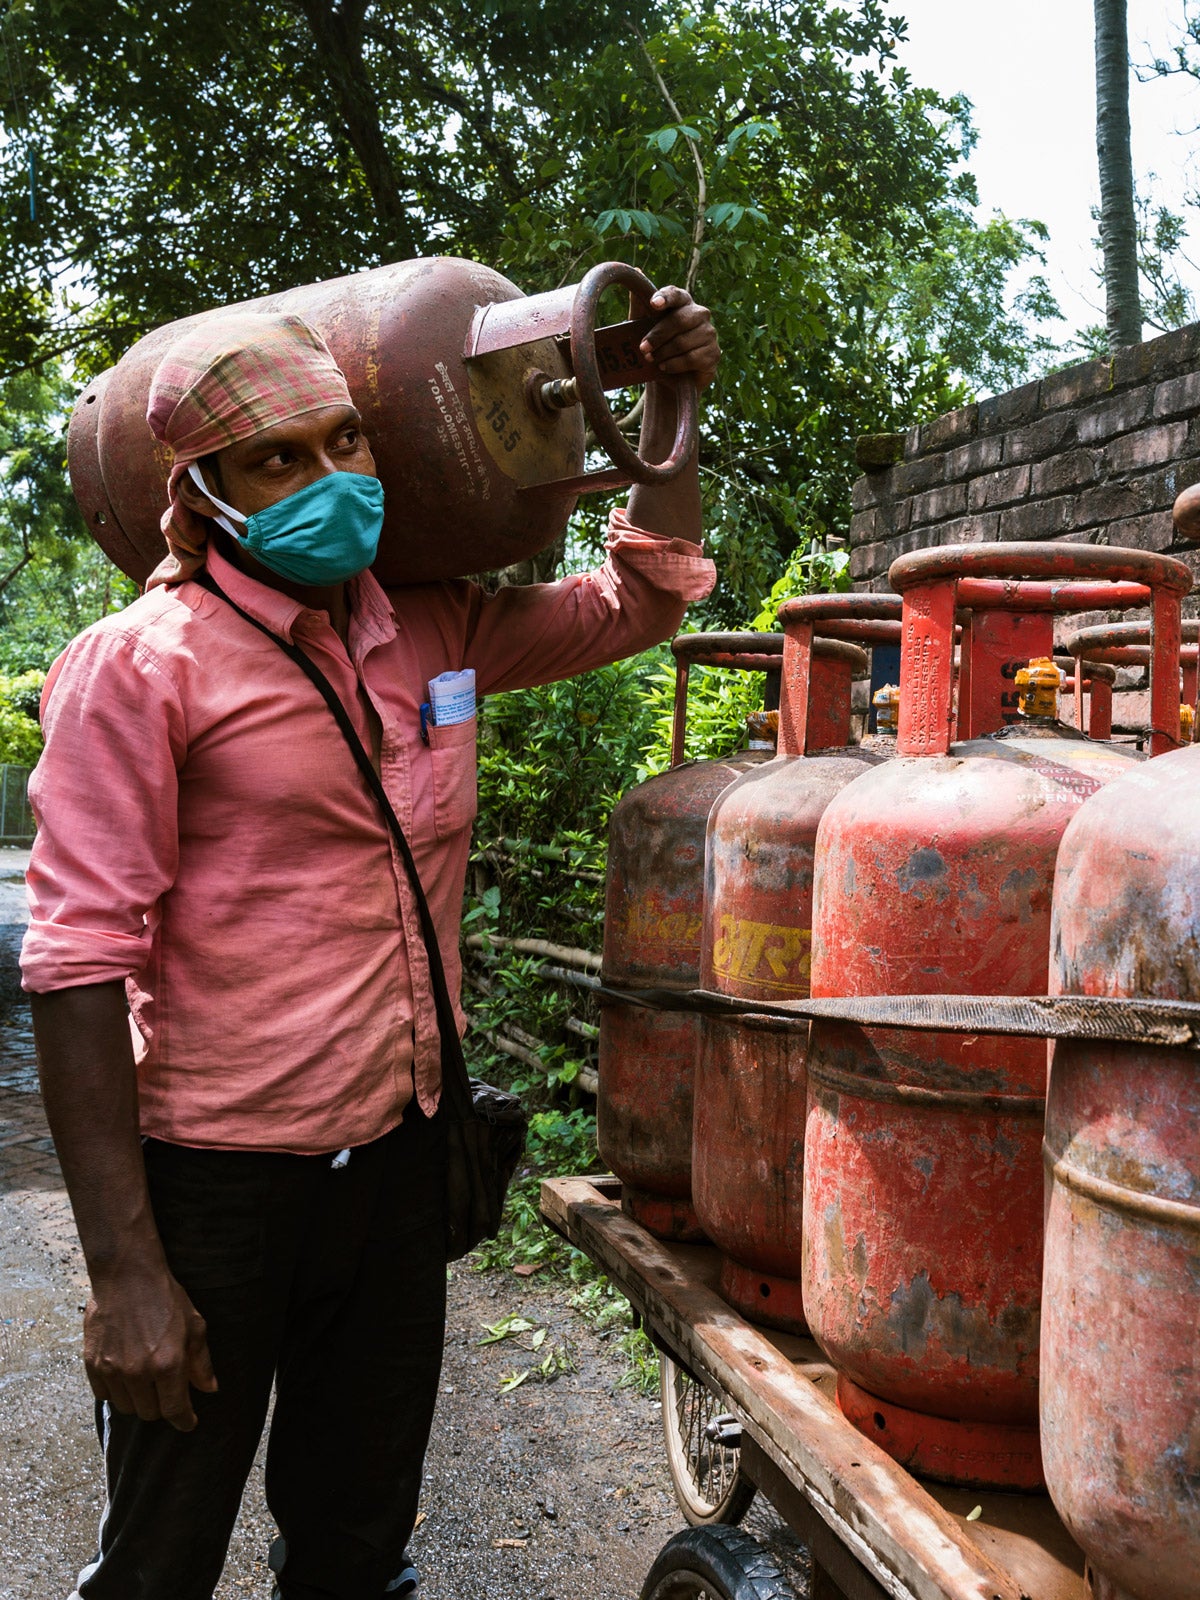 West Bengal, India: A man wears a pink button-down shirt, green cloth mask, and head wrap while holding a large canister of cooking gas next to a truck bed with multiple canisters.